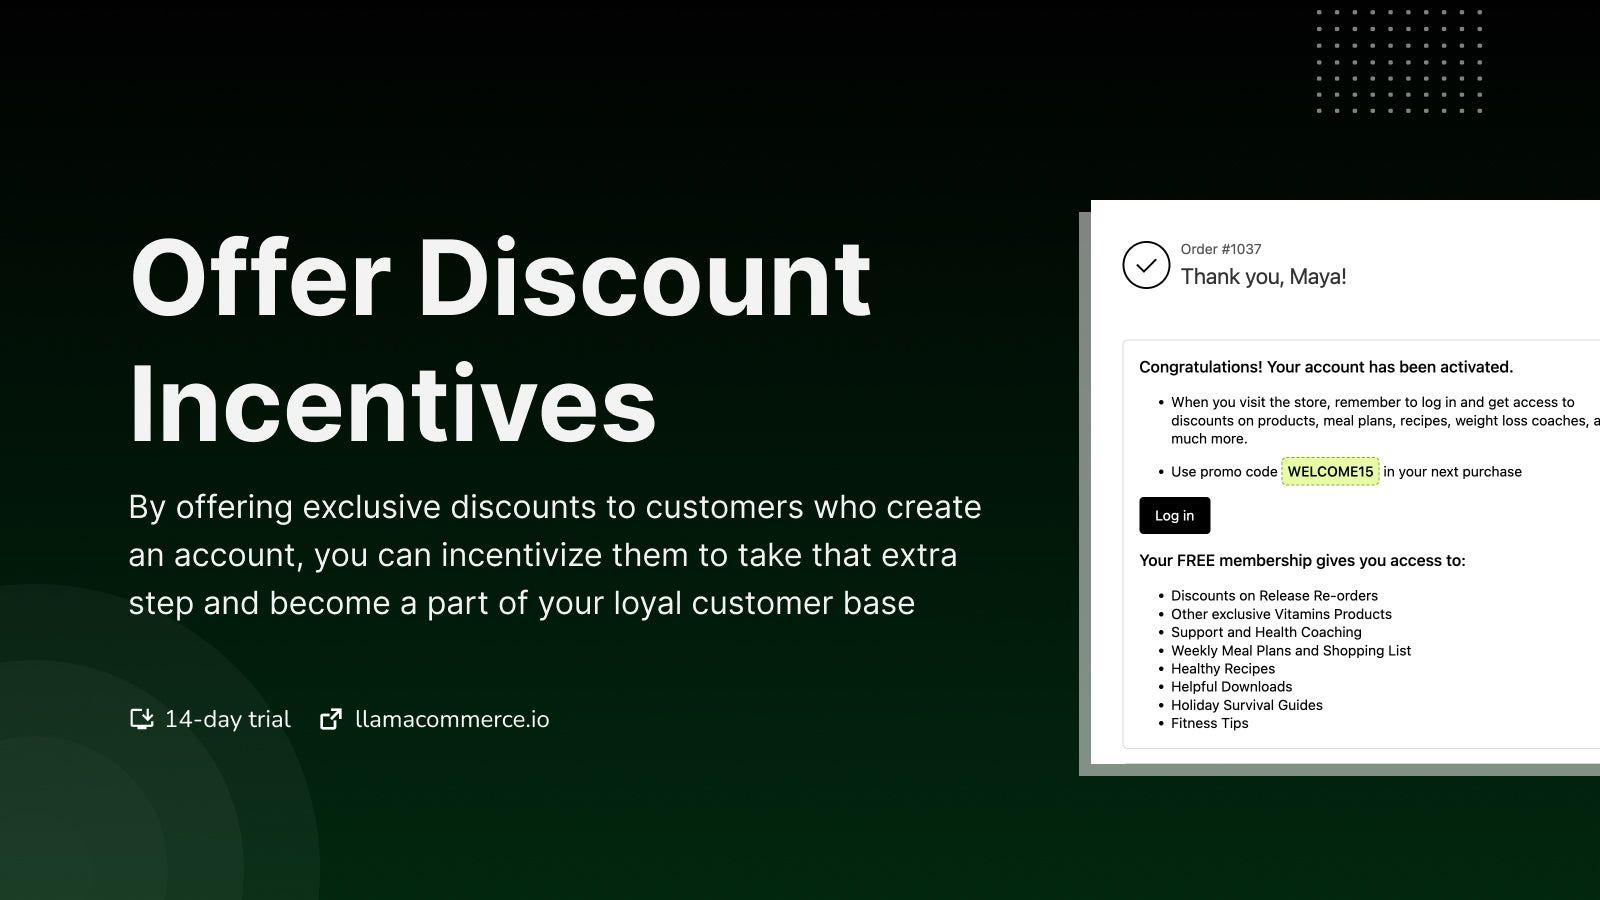 Offer Discounts Incentives